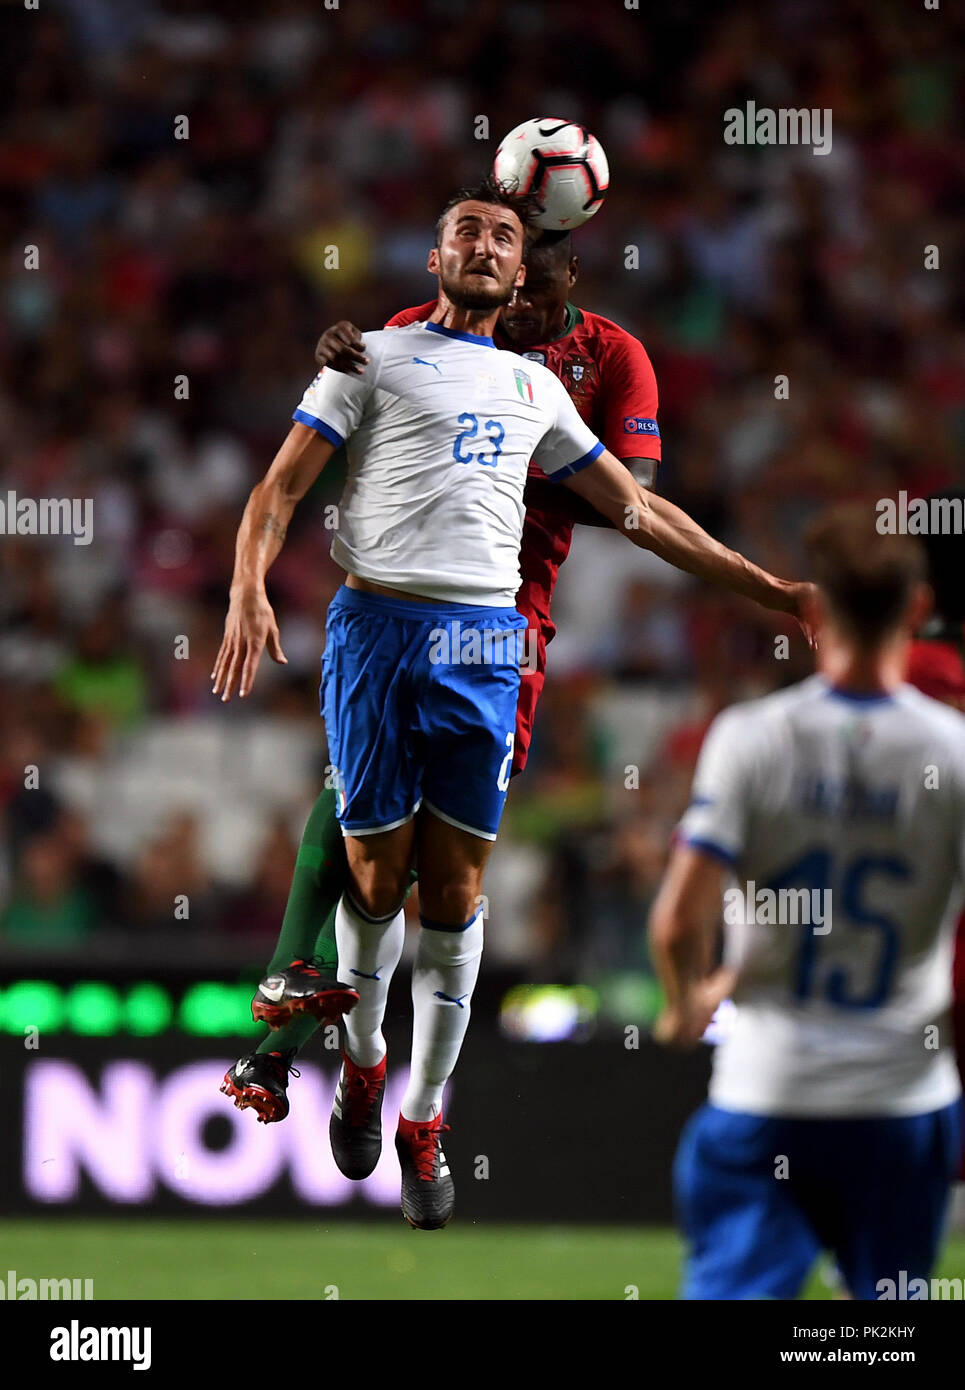 Lisbon, Portugal. 10th Sep, 2018. Bryan Cristante (L) of Italy heads the ball with William Carvalho of Portugal during the UEFA Nations League soccer match between Portugal and Italy at Luz Stadium in Lisbon, Portugal, on Sept. 10, 2018. Portugal won 1-0. Credit: Zhang Liyun/Xinhua/Alamy Live News Stock Photo